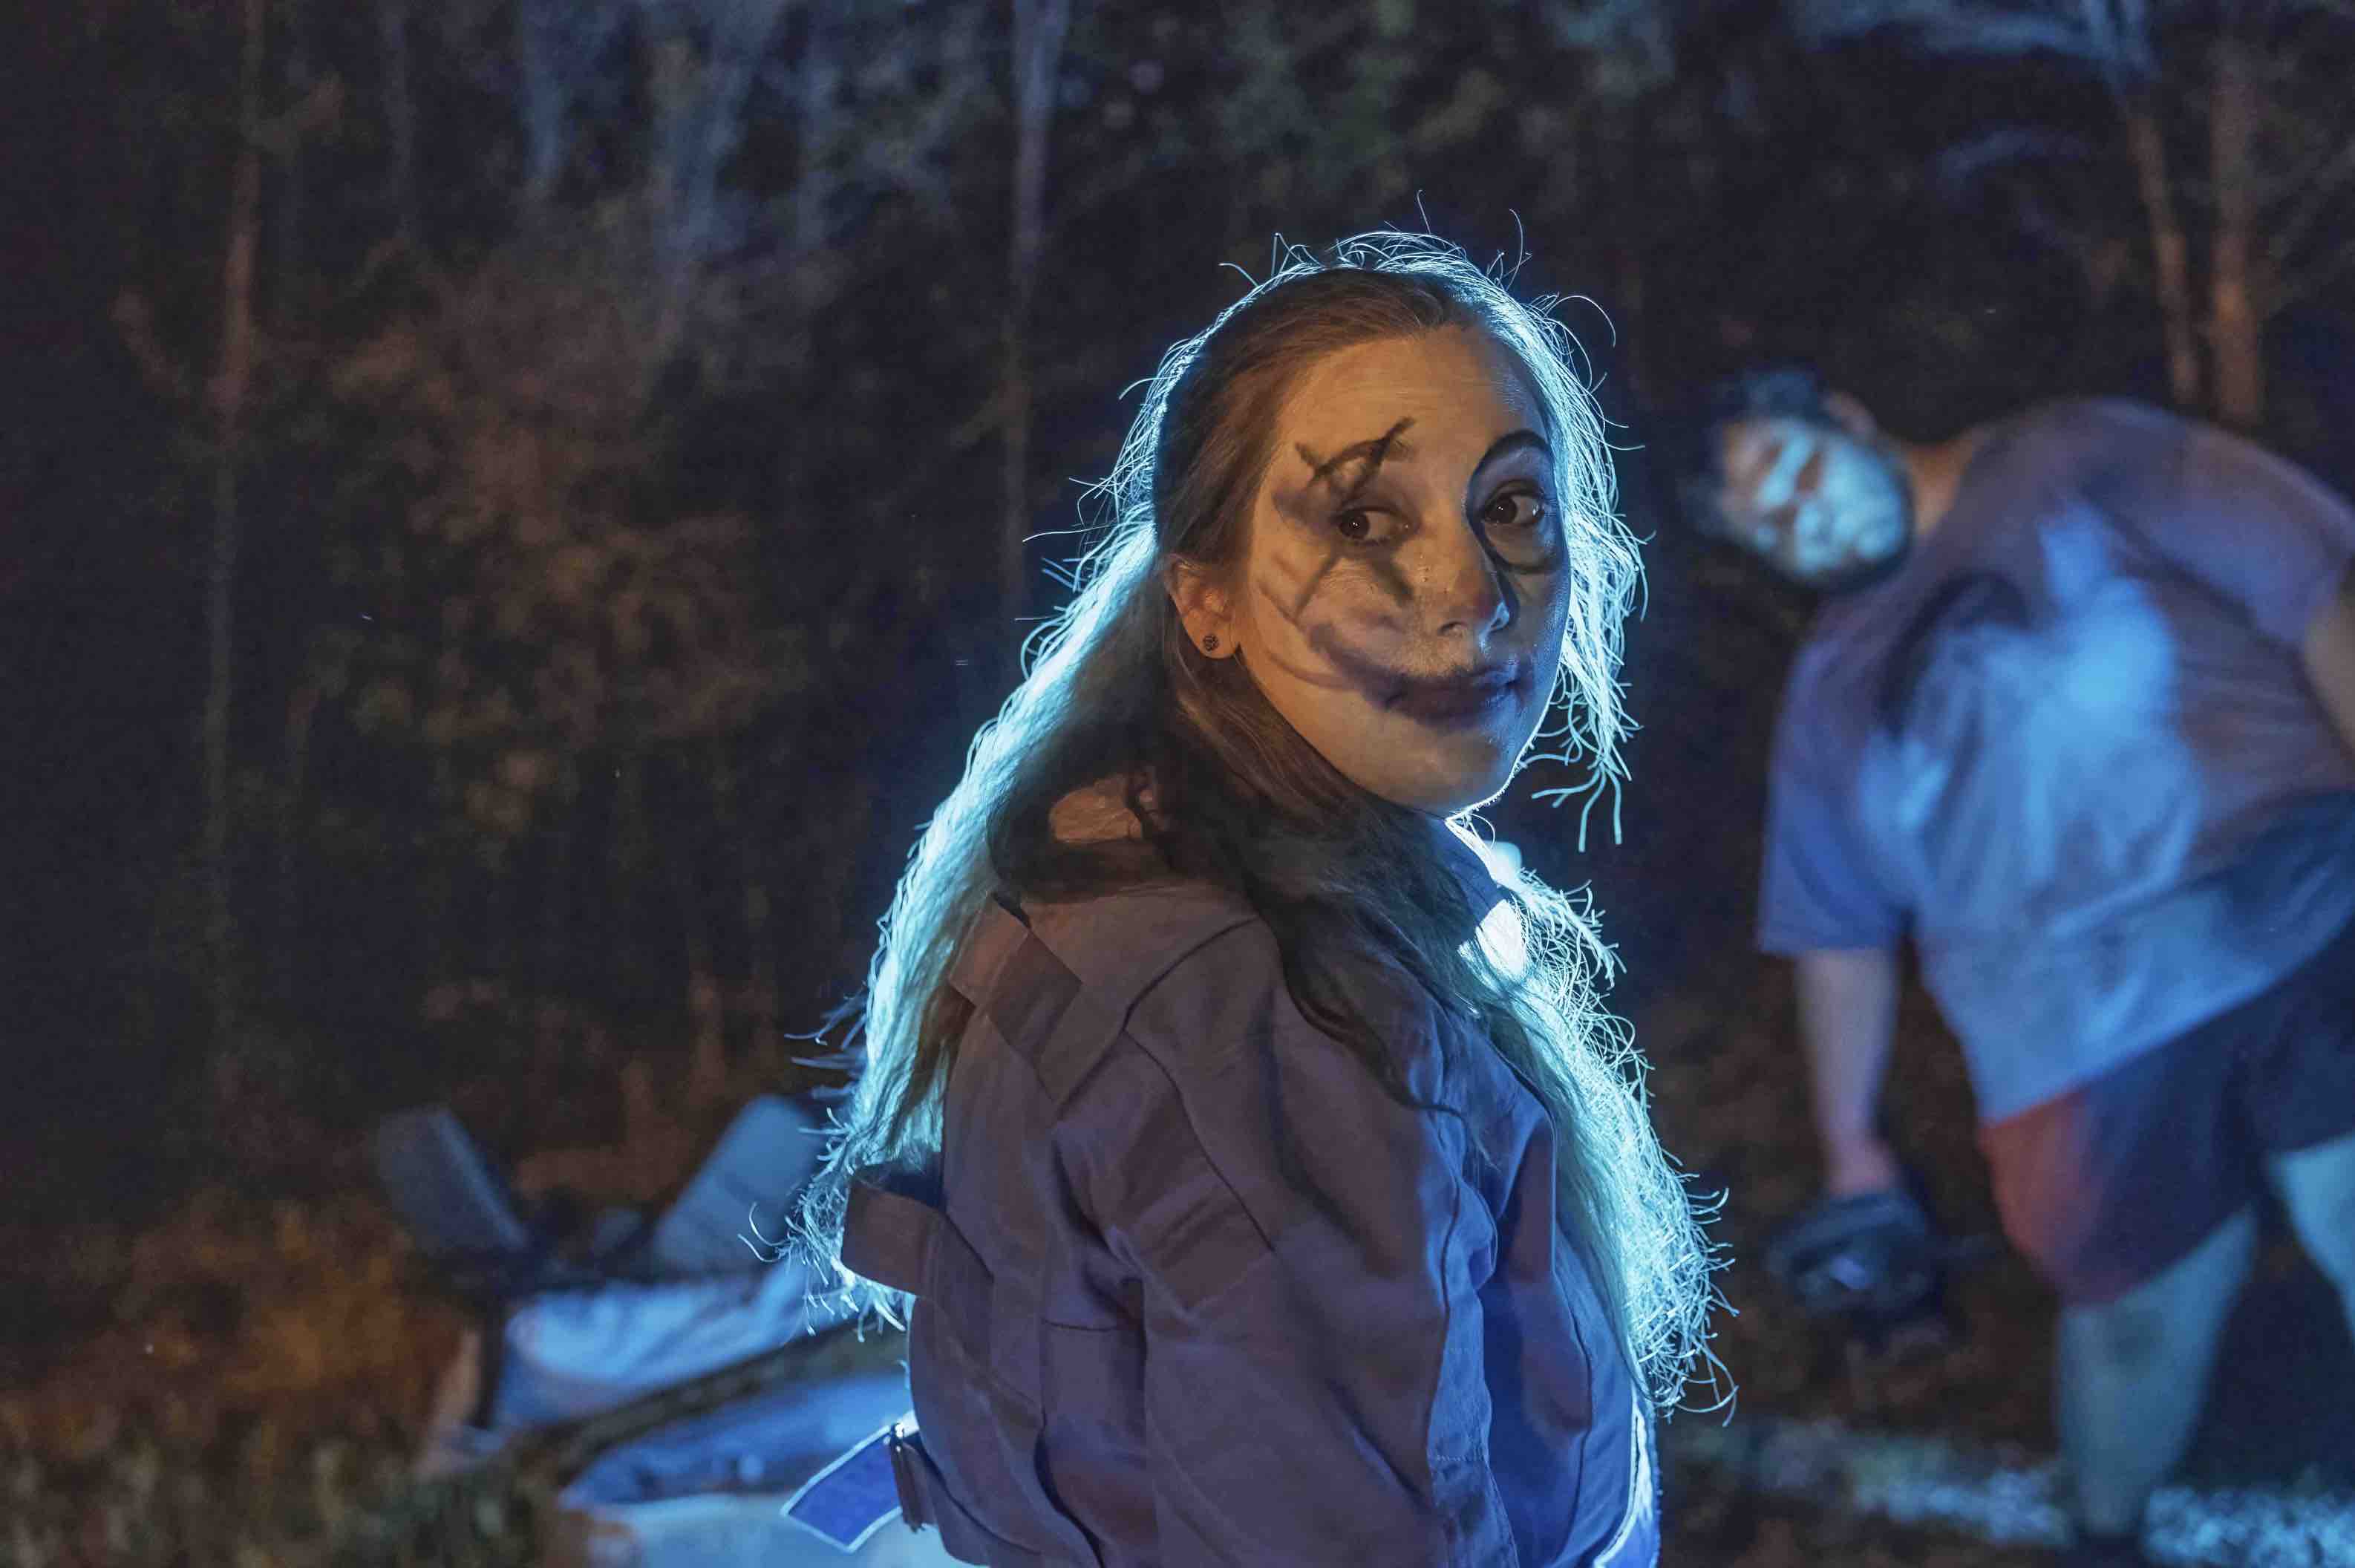 SMILE (2022) Deranged killers horror film preview with trailer - MOVIES and  MANIA